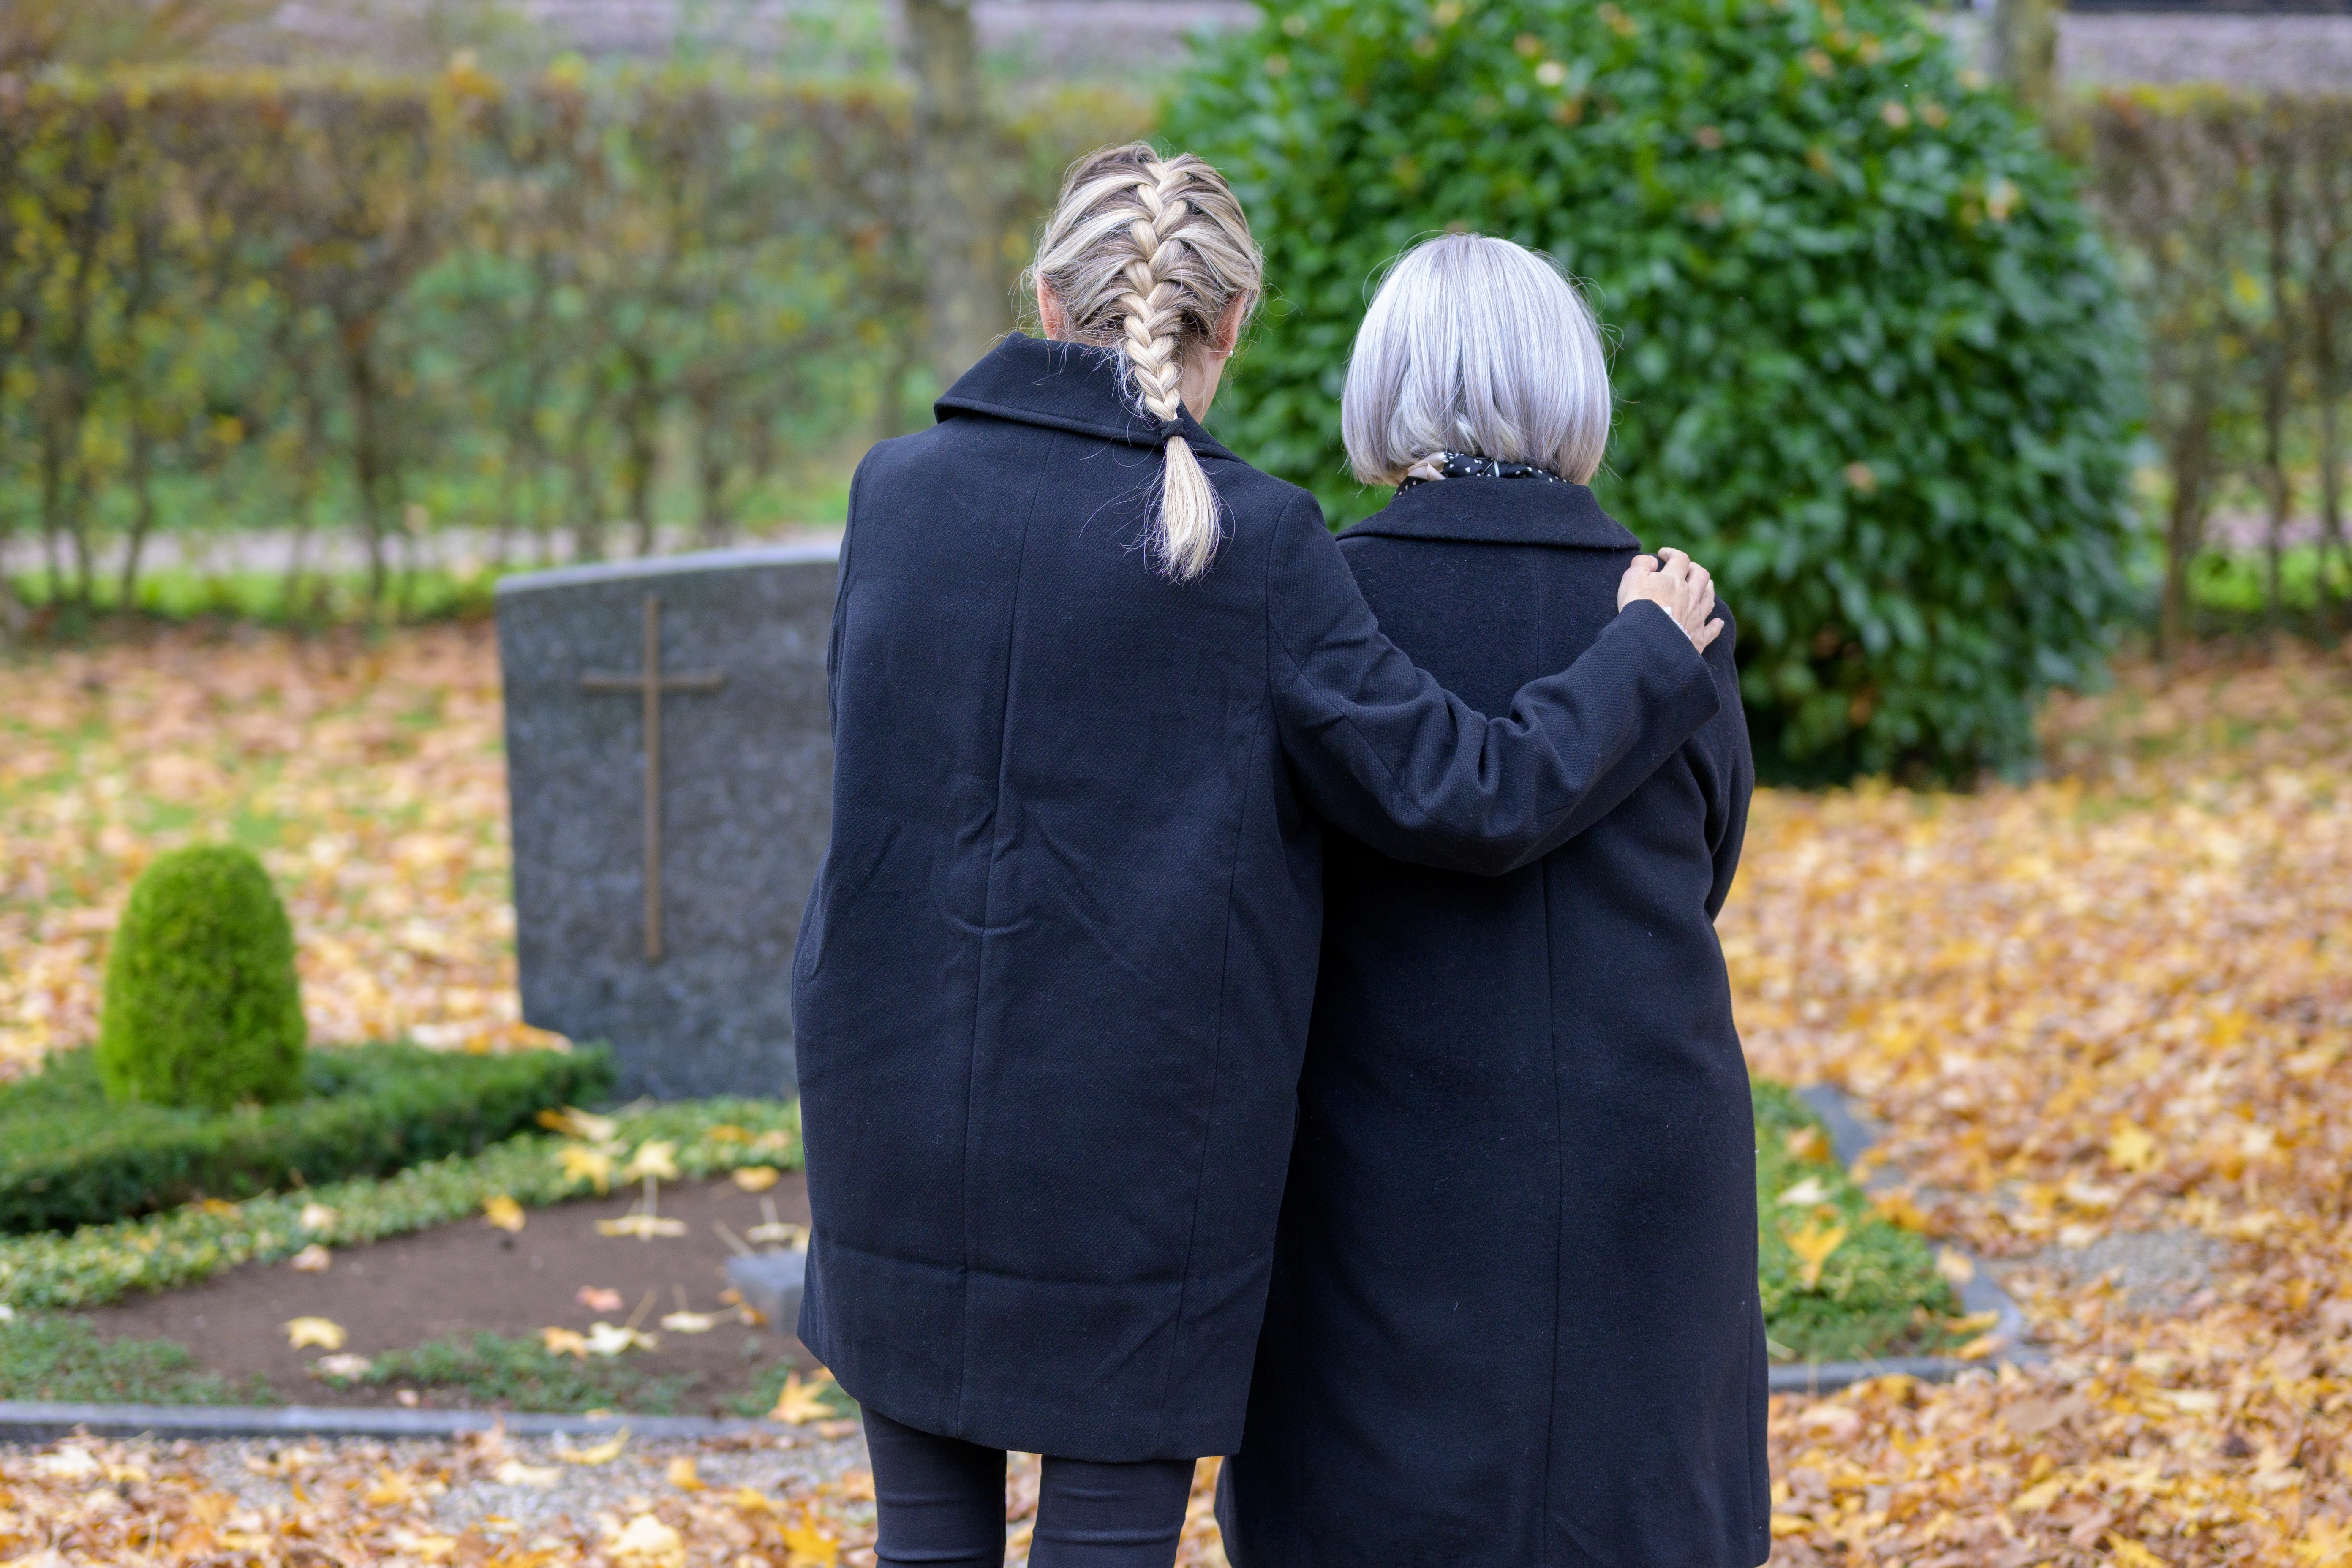 Two women comforting each other while at a grave yard | Source: Shutterstock